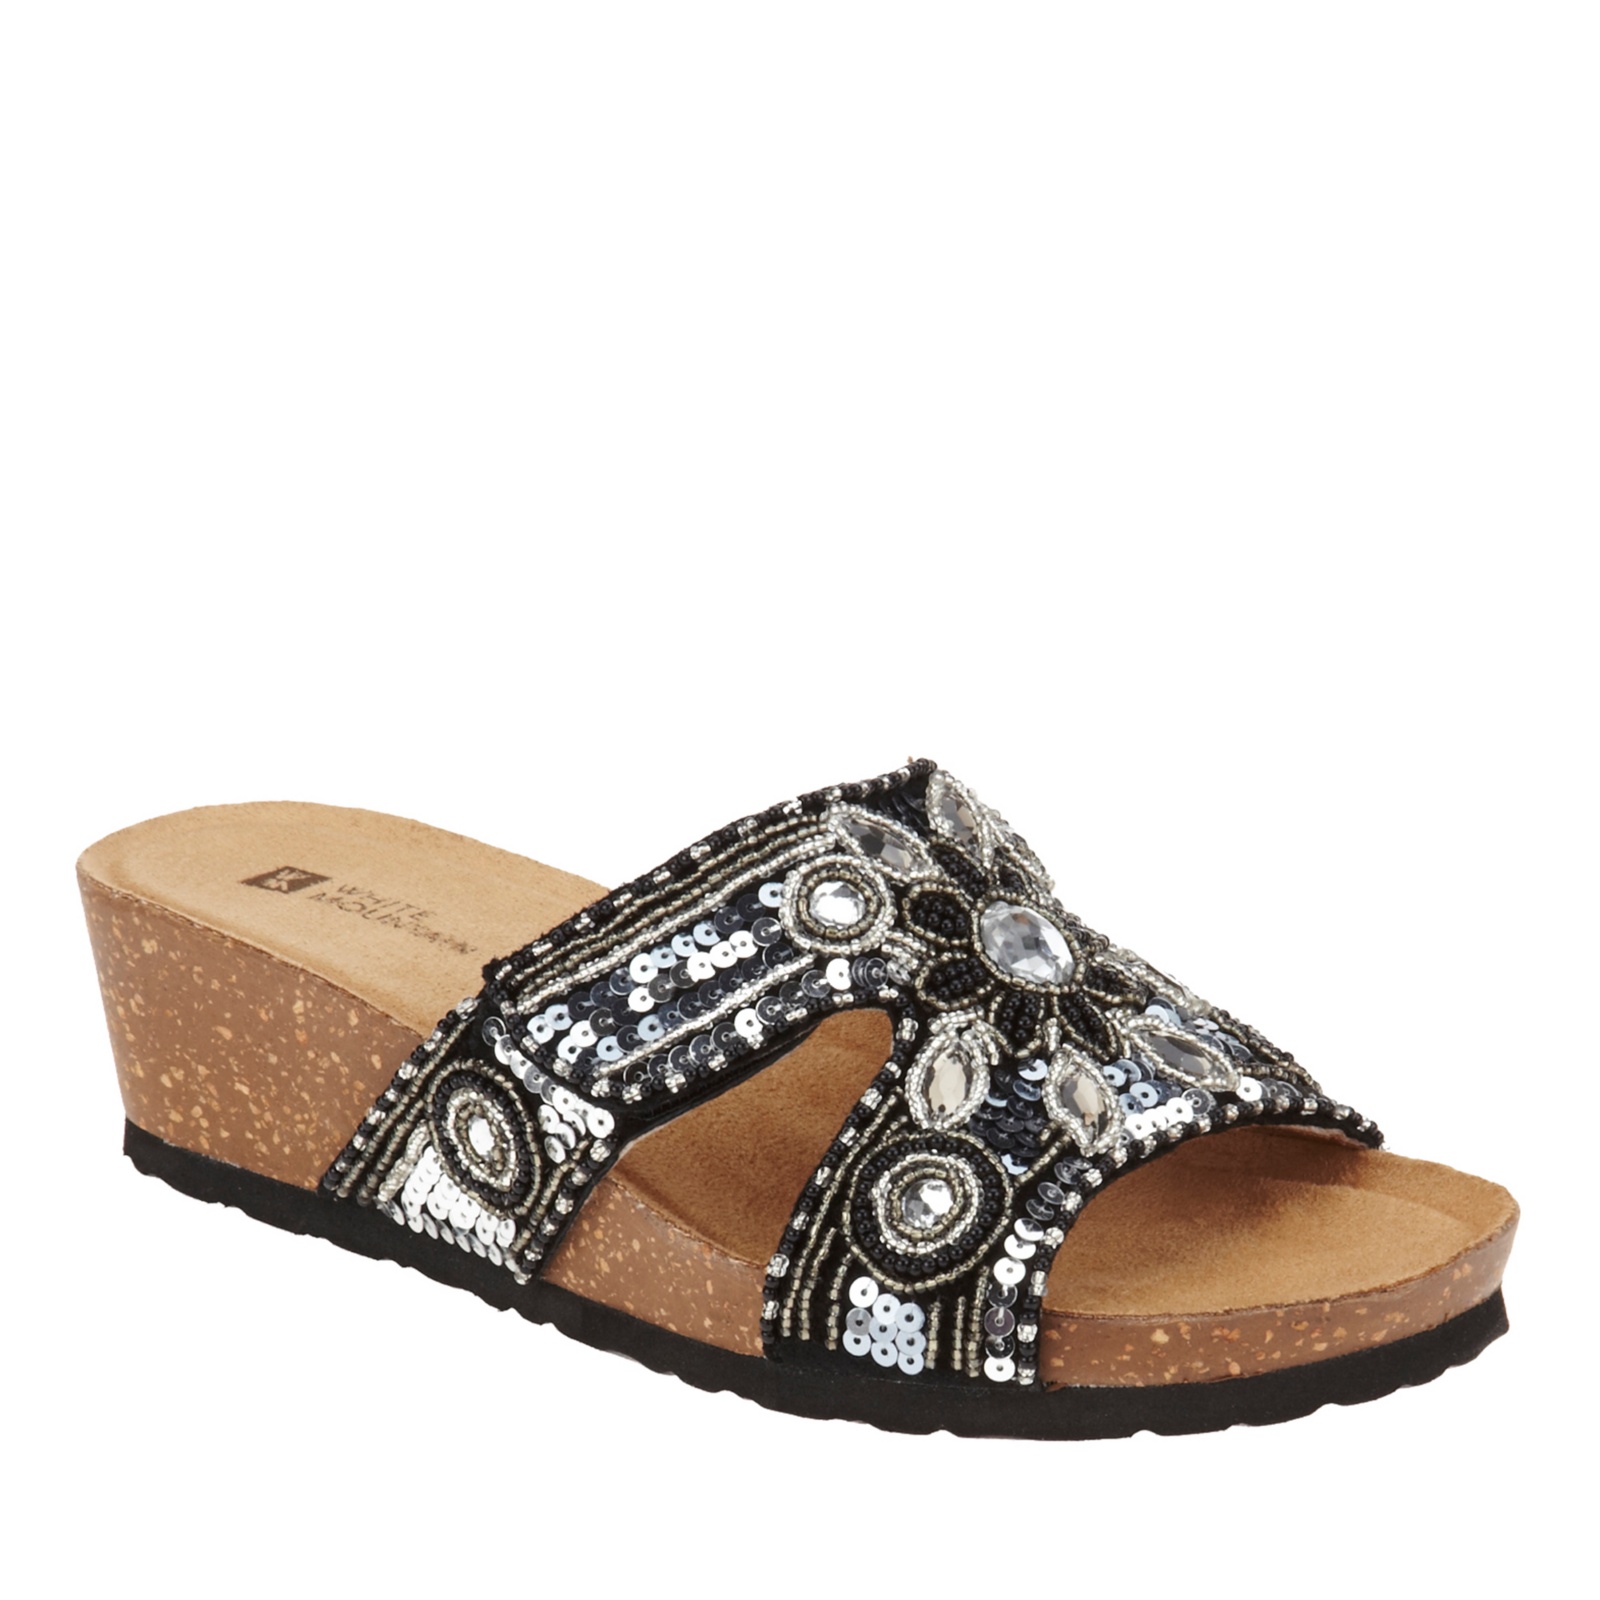 Details about White Mountain Blinker Jeweled Slide Sandals